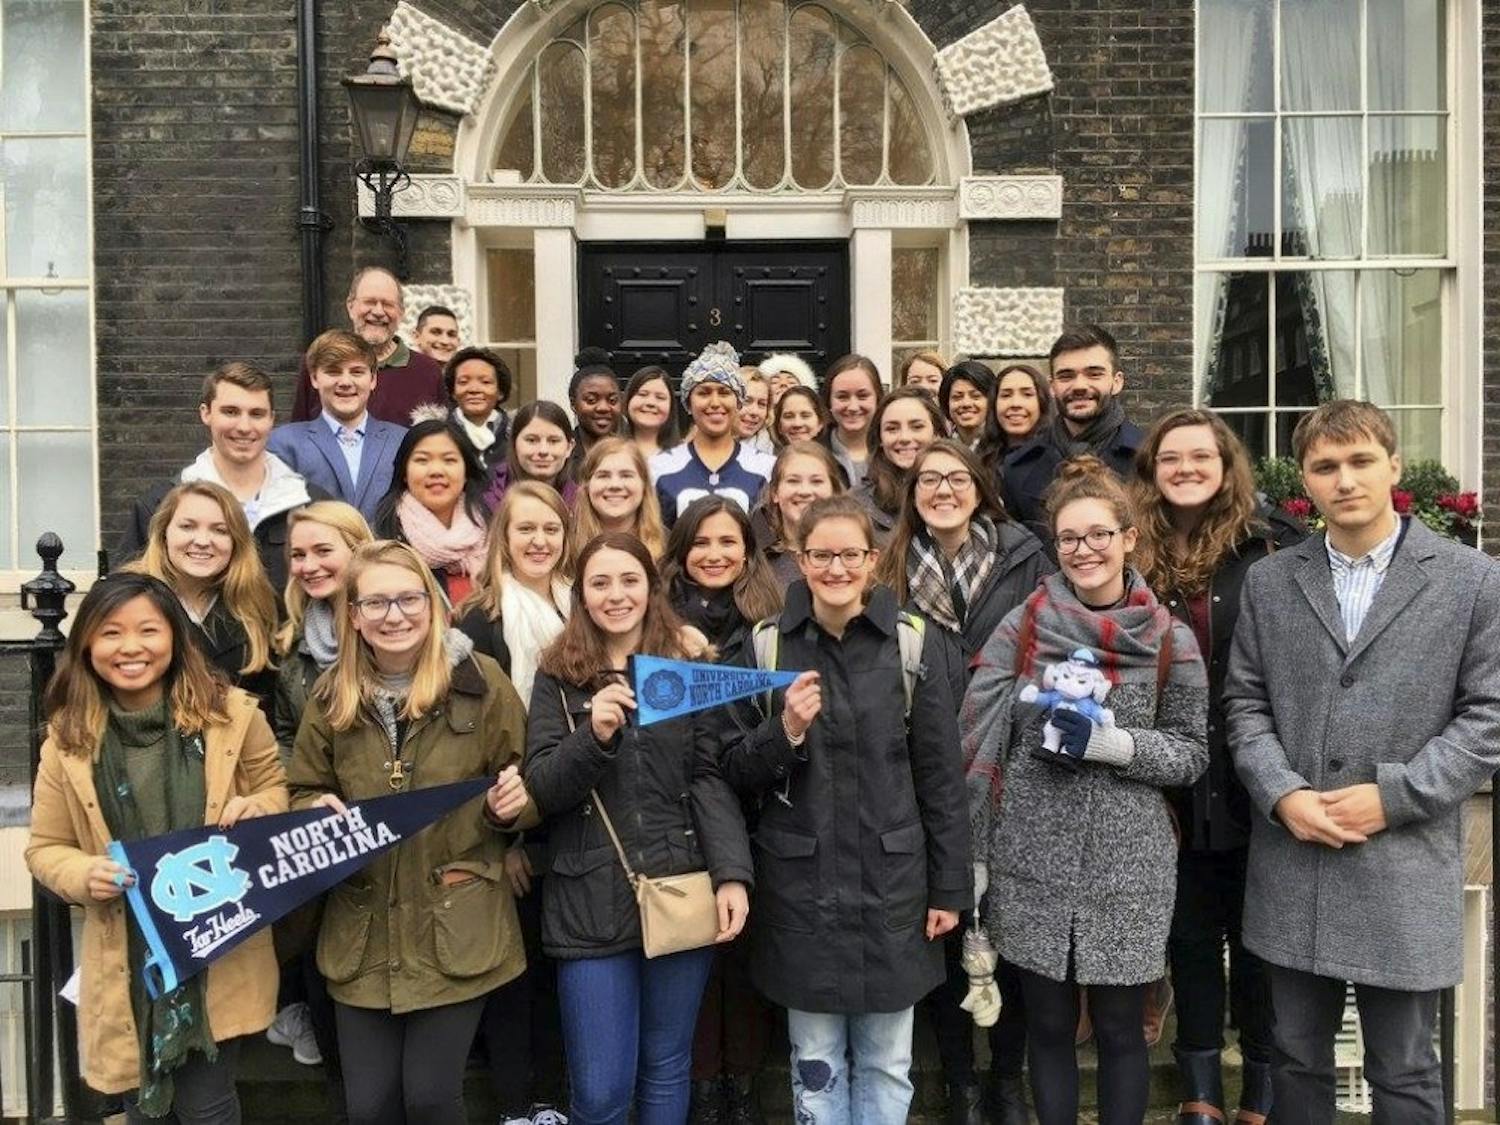 UNC students who studied in London in the spring 2017 semester pose for a photo. Courtesy of UNC Faculty.